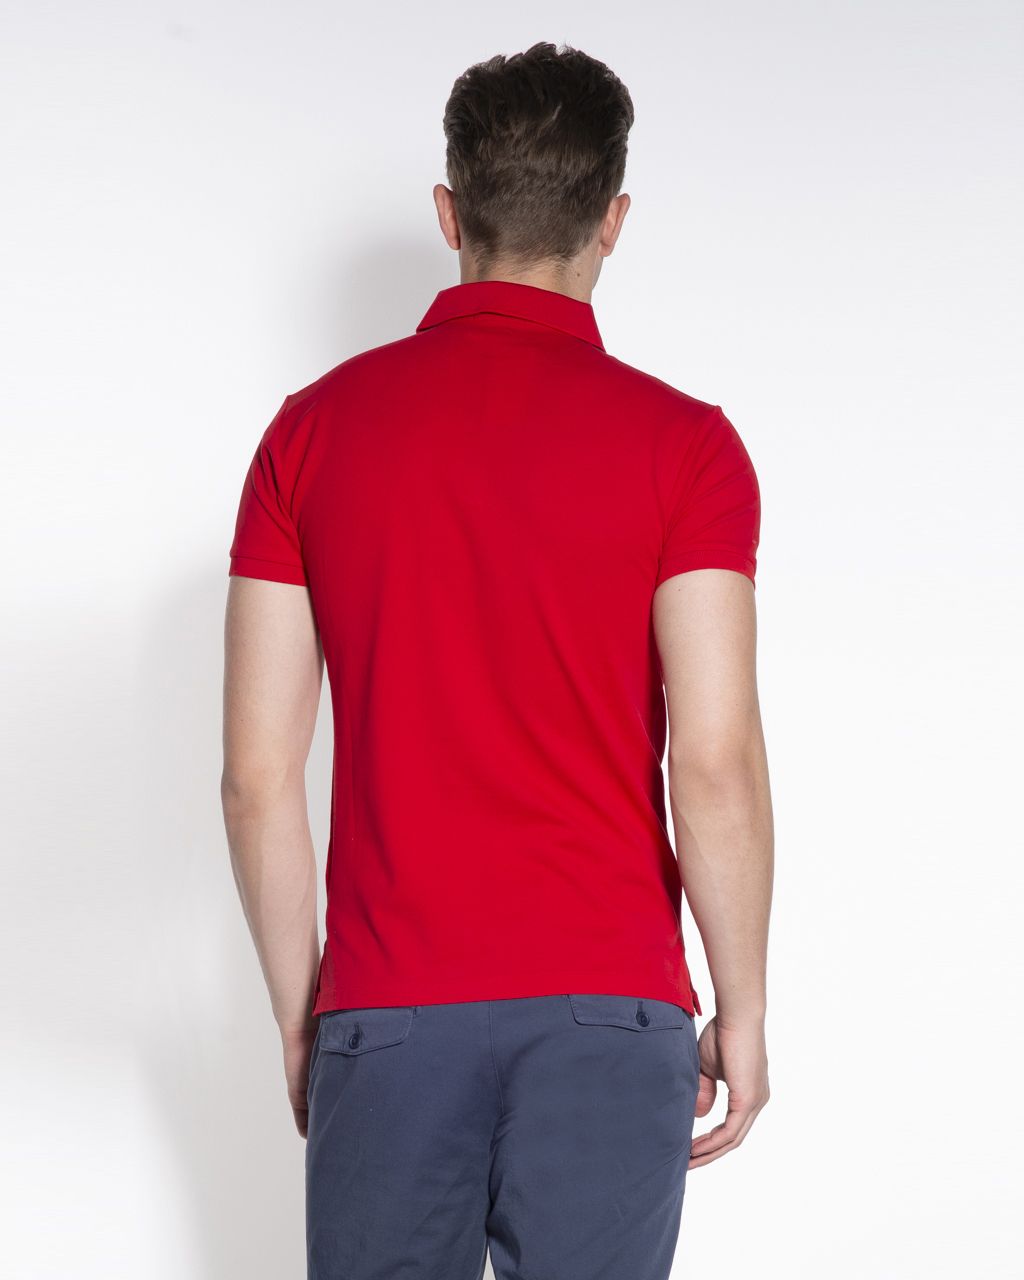 Polo Ralph Lauren Slim Fit Stretch Mesh Polo KM Rood 047432-002-L